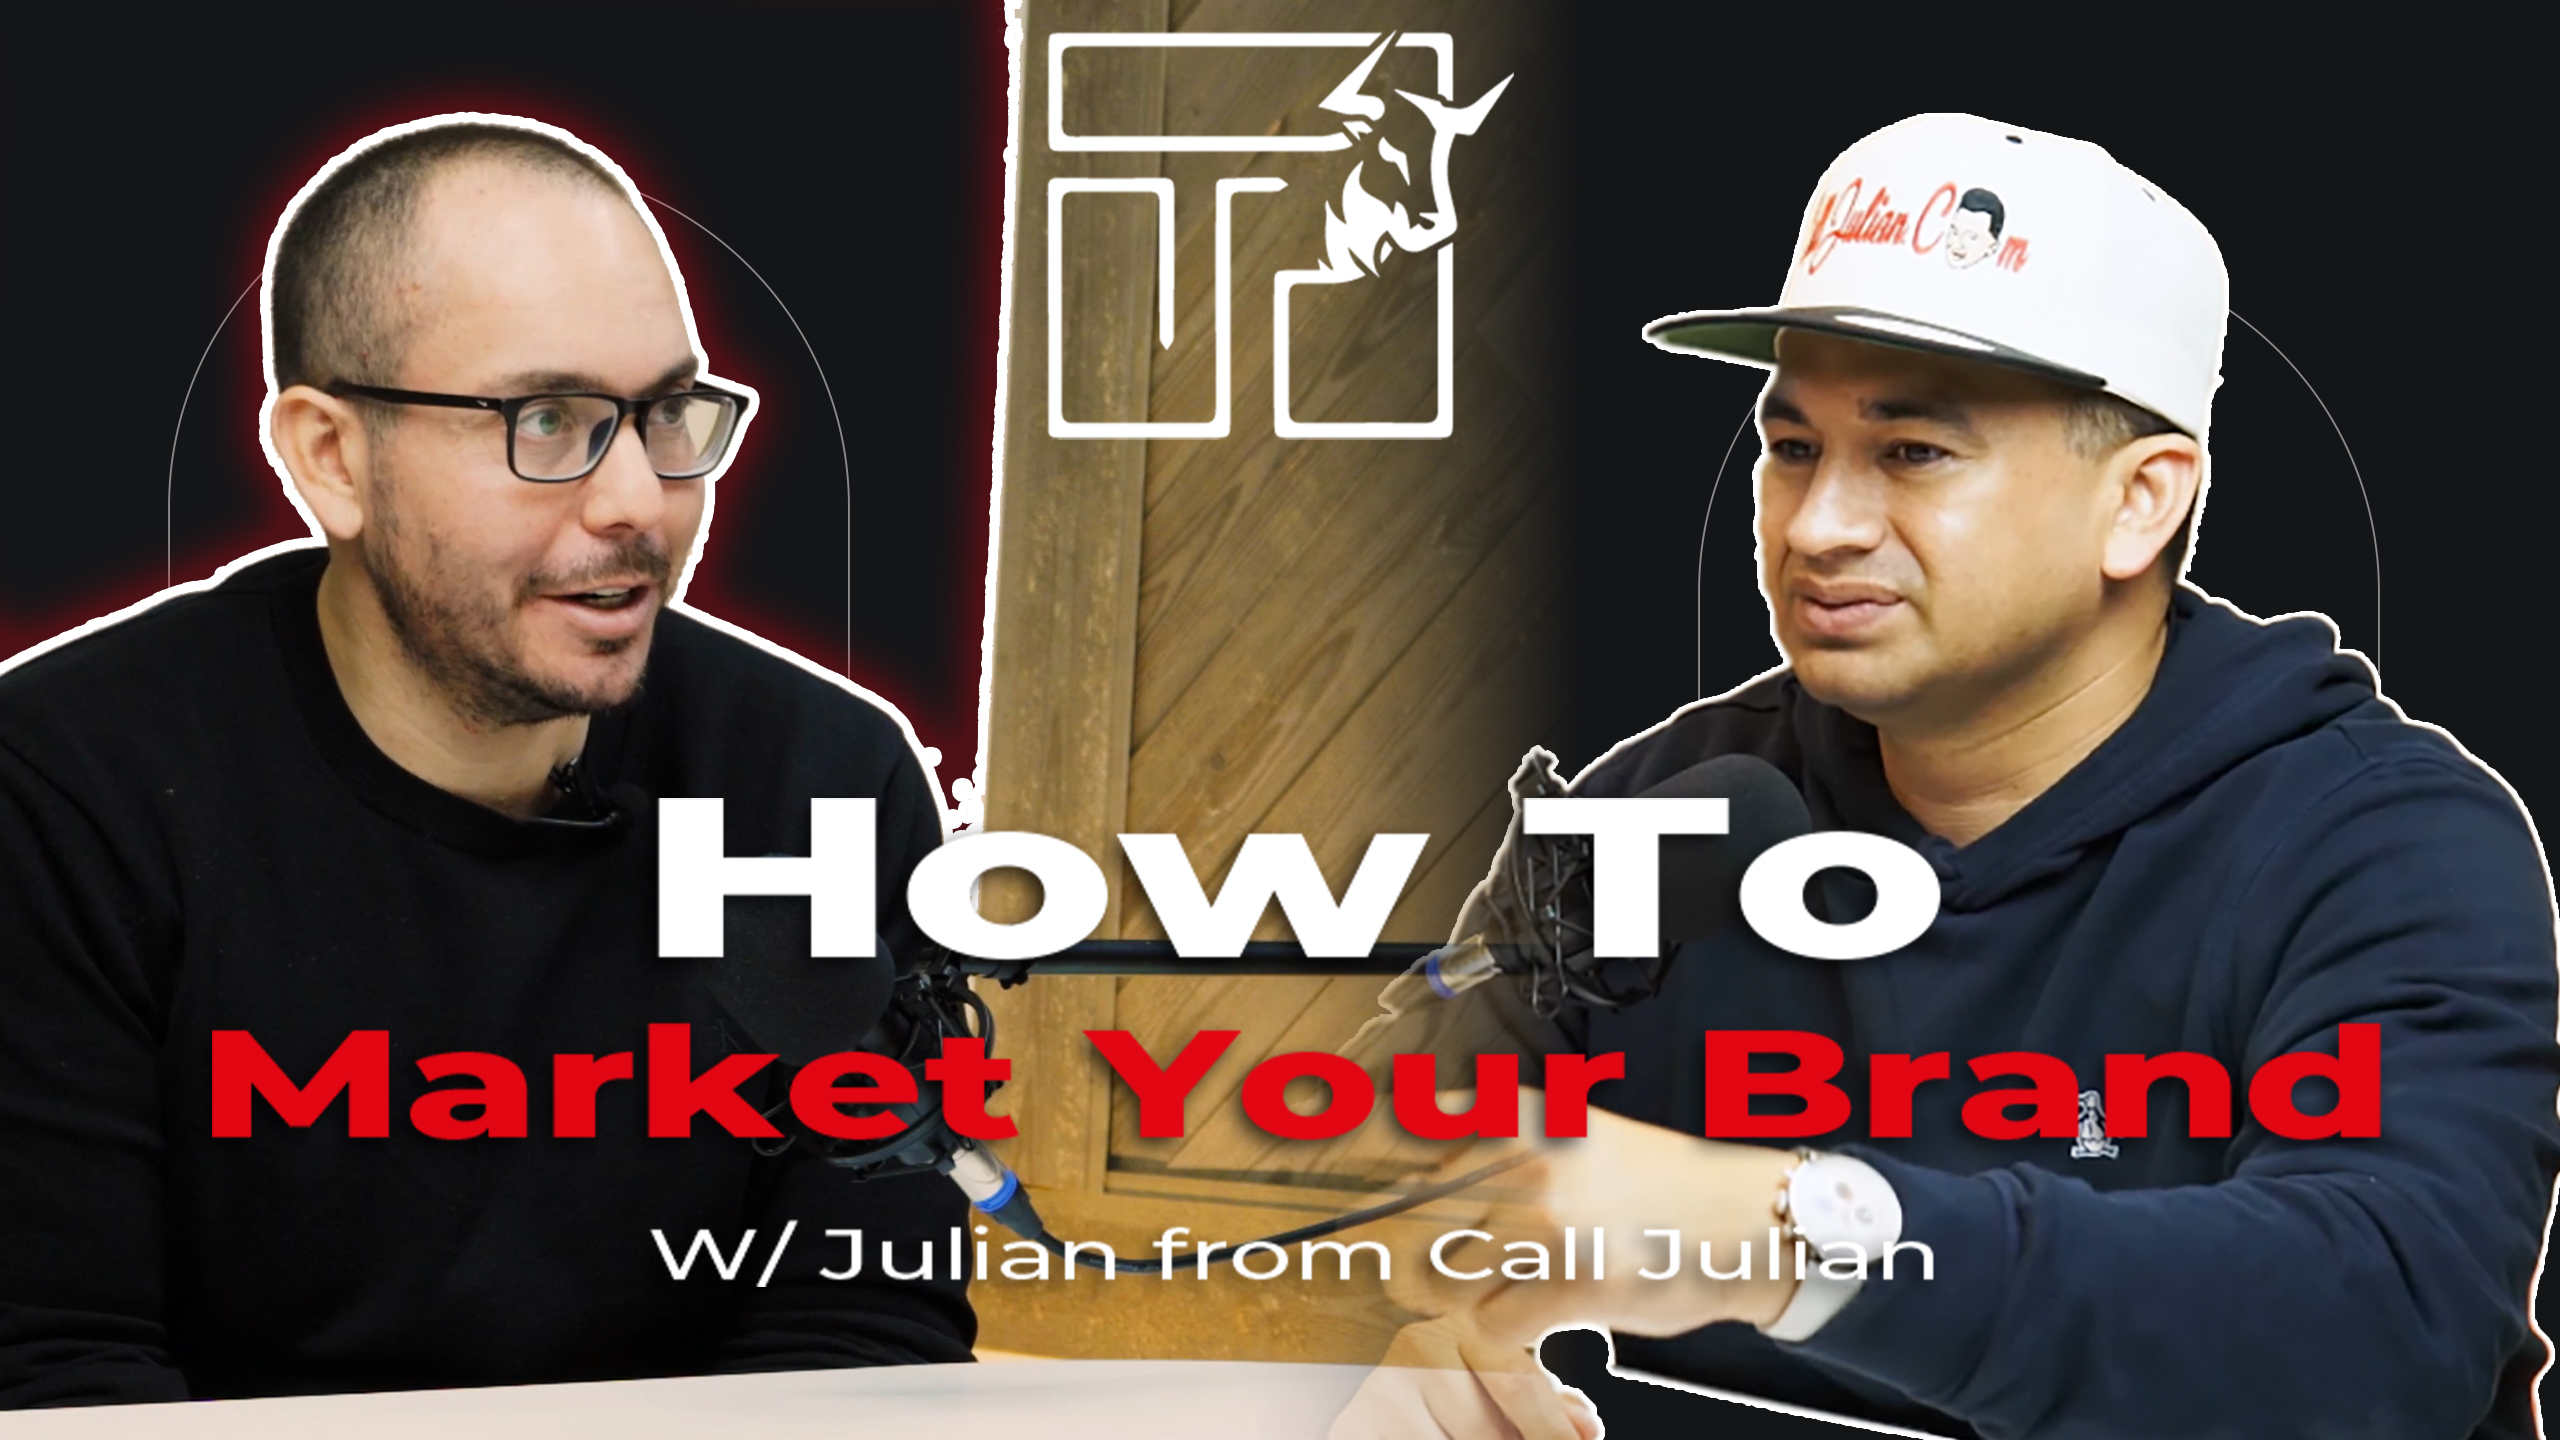 In times where many business owners are in a state of unknown for the upcoming year, Tony and Julian are here to give perspective on how 2023 is a time to prosper. Naturally the immediate question that comes to mind is, "HOW?" One word, Marketing. If your plan is to not only survive but actually grow your business in 2023 you won't want to miss today's podcast!